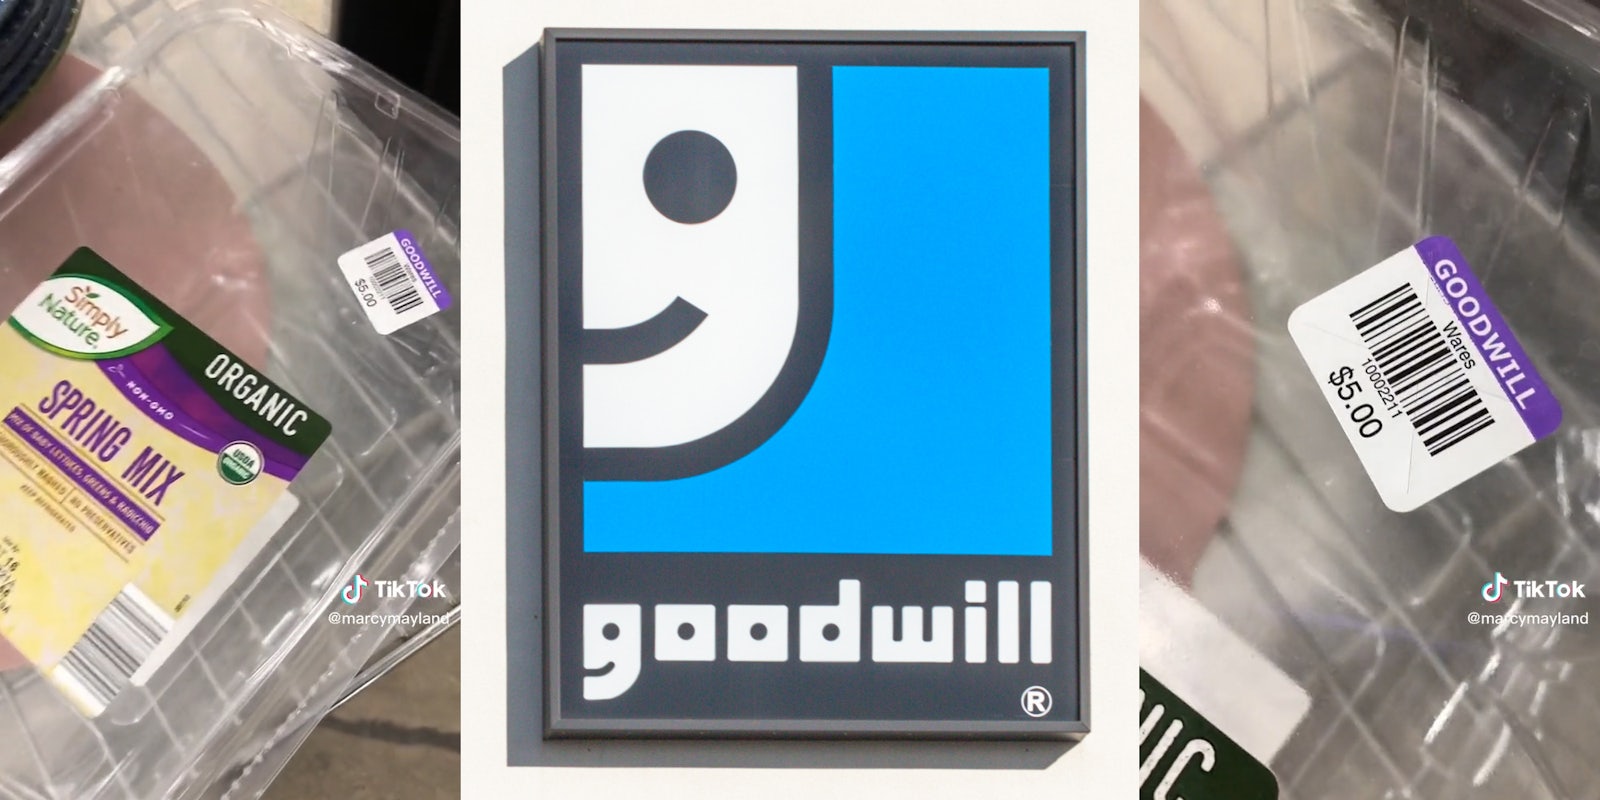 goodwill selling empty recyclable container for $5